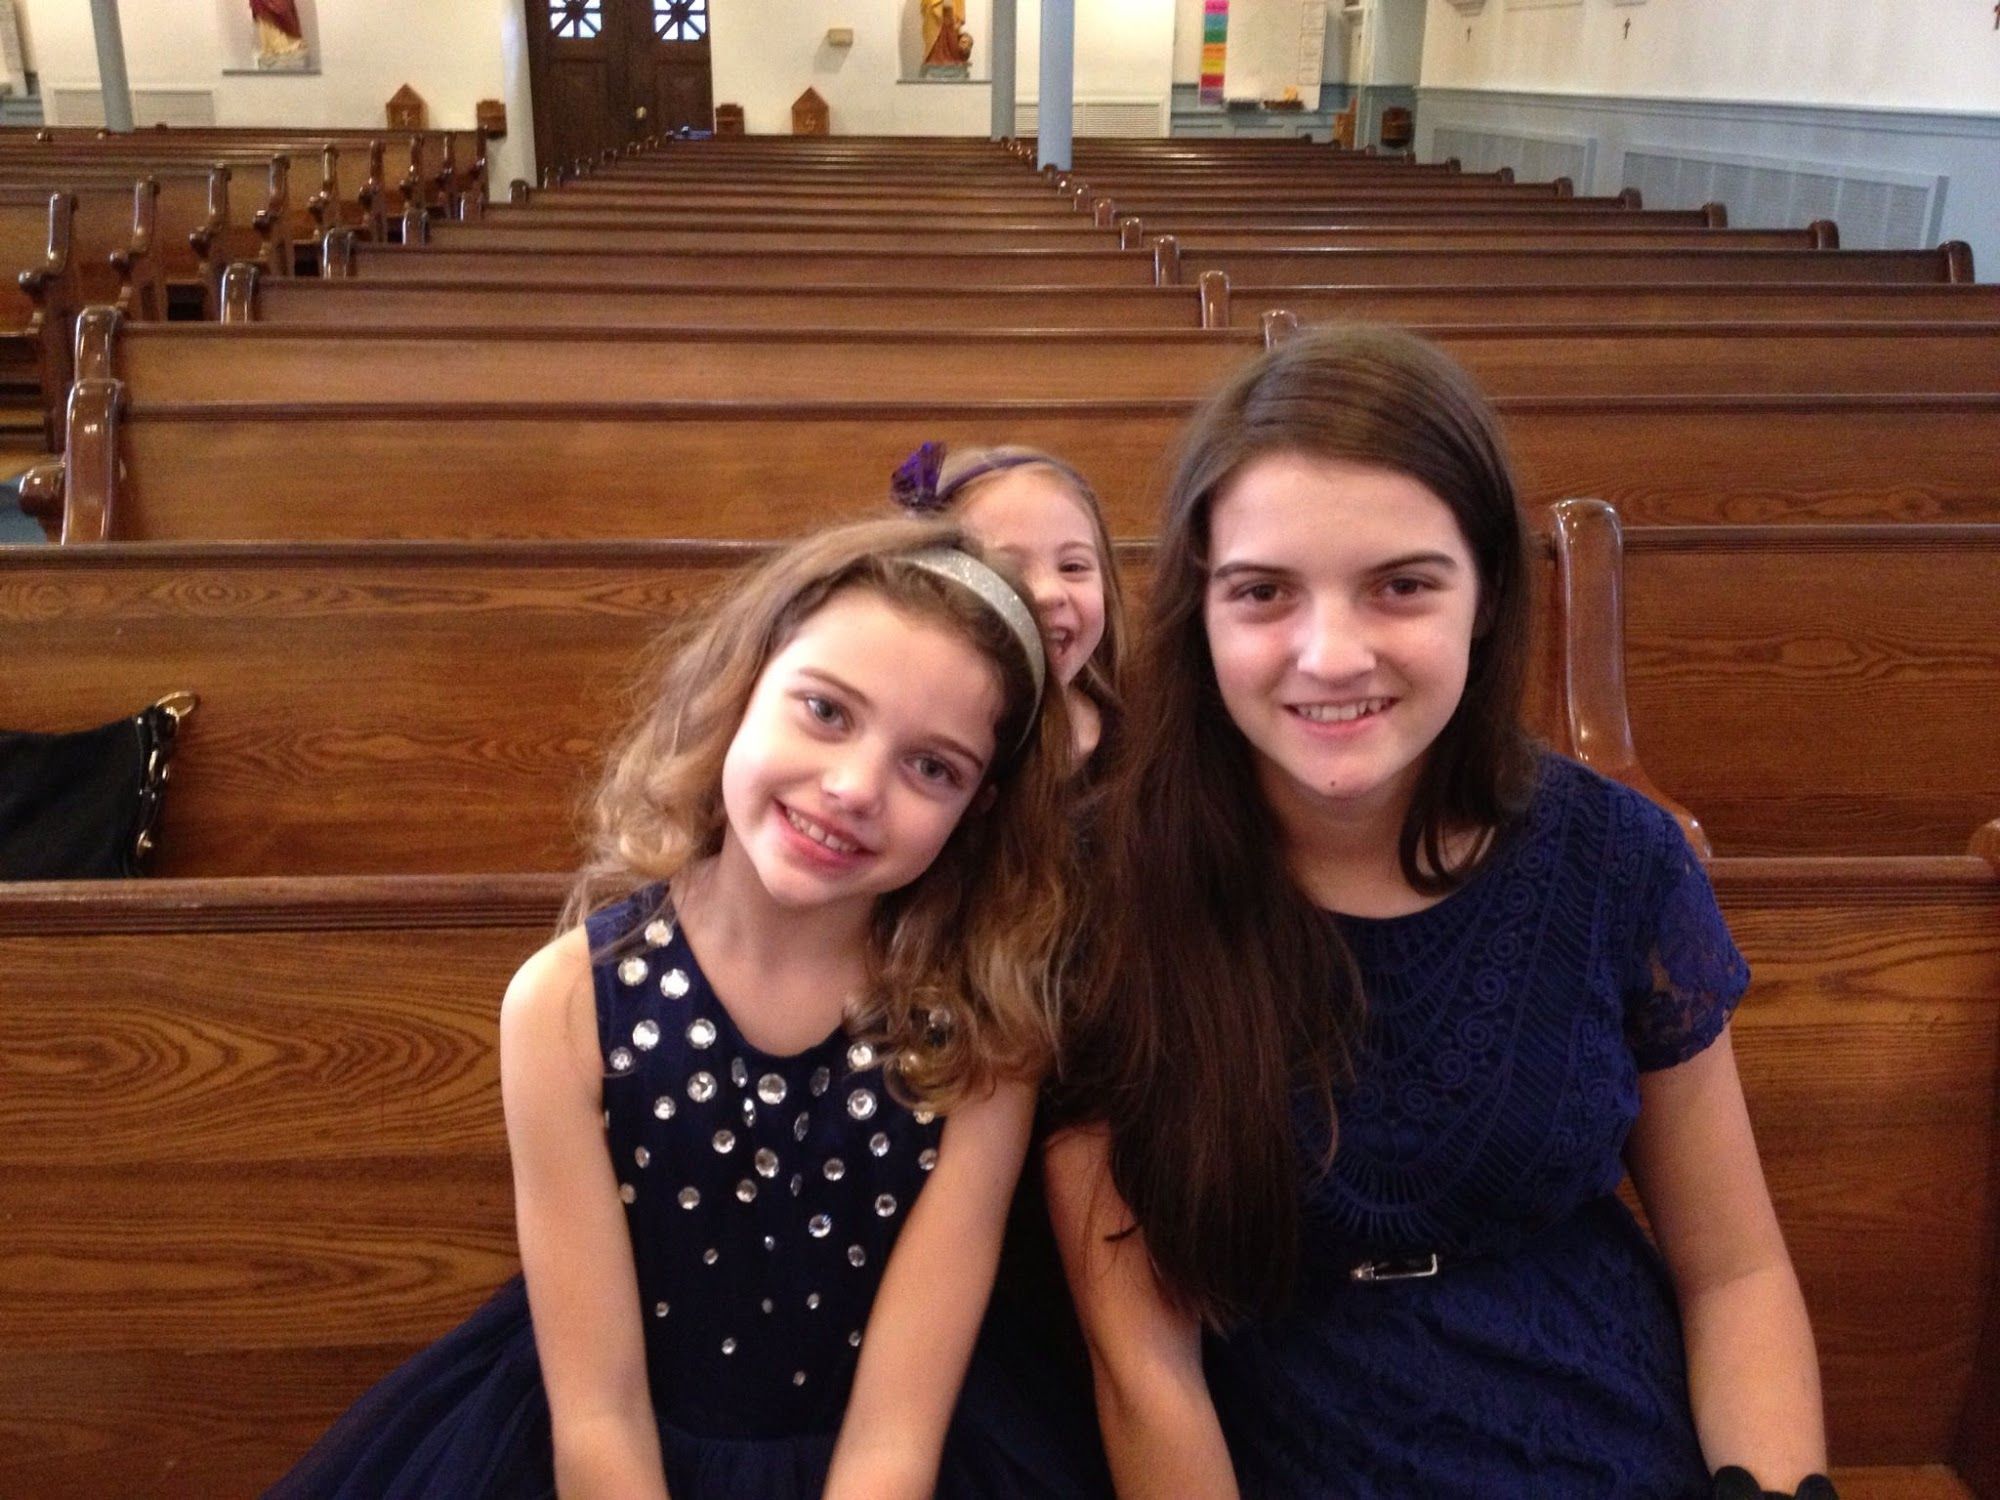  My nieces ready for their sister's baptism.Yes, that is Buggy photobombing. 